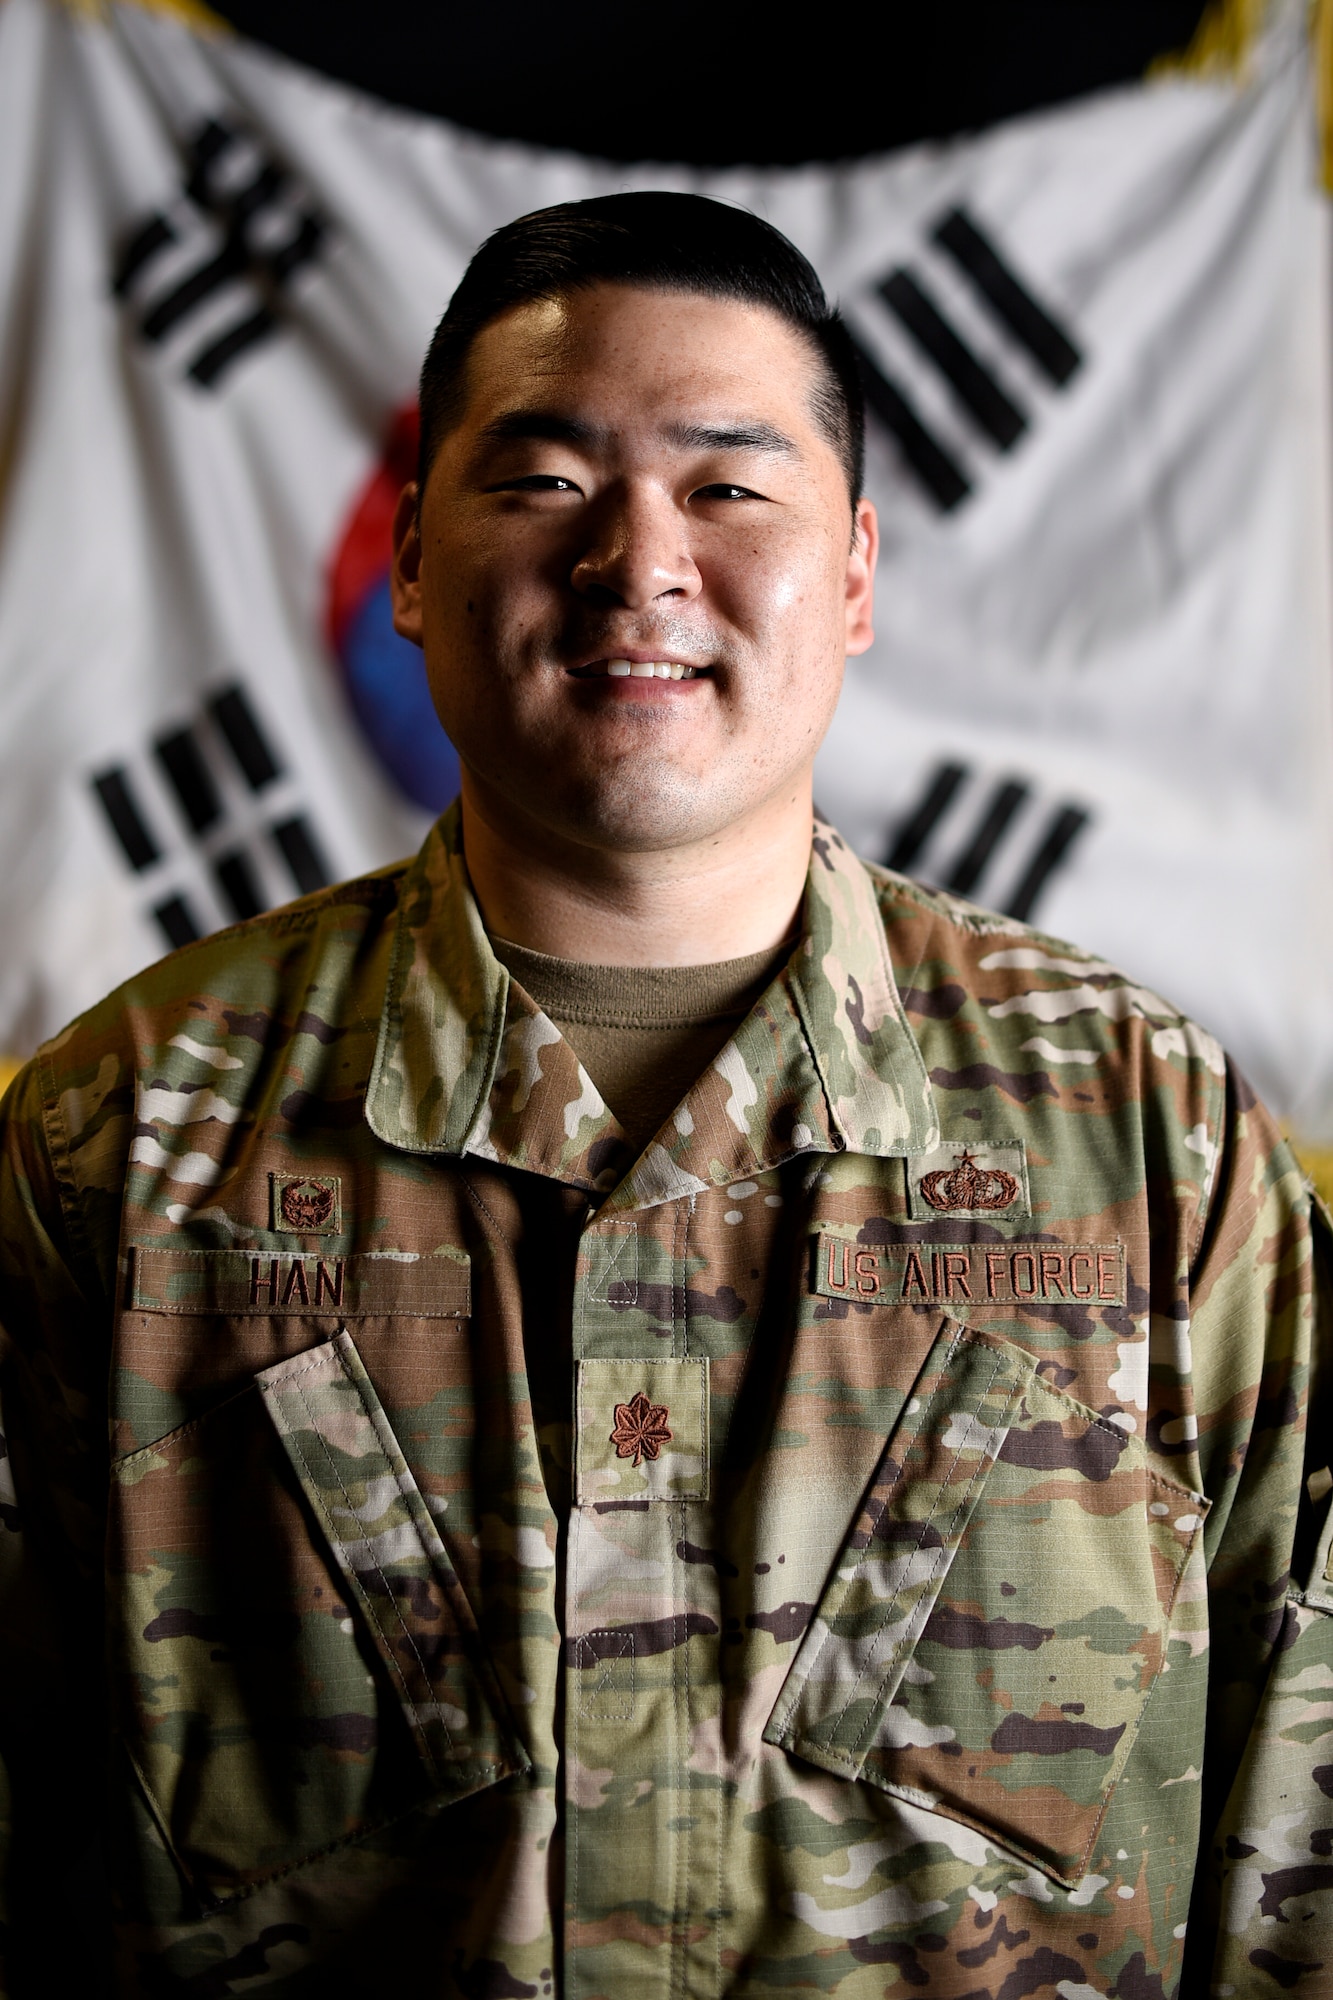 Maj. Samuel Han, 8th Comptroller Squadron commander, poses for a photo at Kunsan Air Base, Republic of Korea, May 27, 2021. Han’s family immigrated from Busan, South Korea, to Mission Viejo, California, where he and his brother grew up as the only Asians in his community. He joined the Air Force to pay the nation back and thank them for the opportunities his family had since moving to the United States. (U.S. Air Force photo by Senior Airman Suzie Plotnikov)